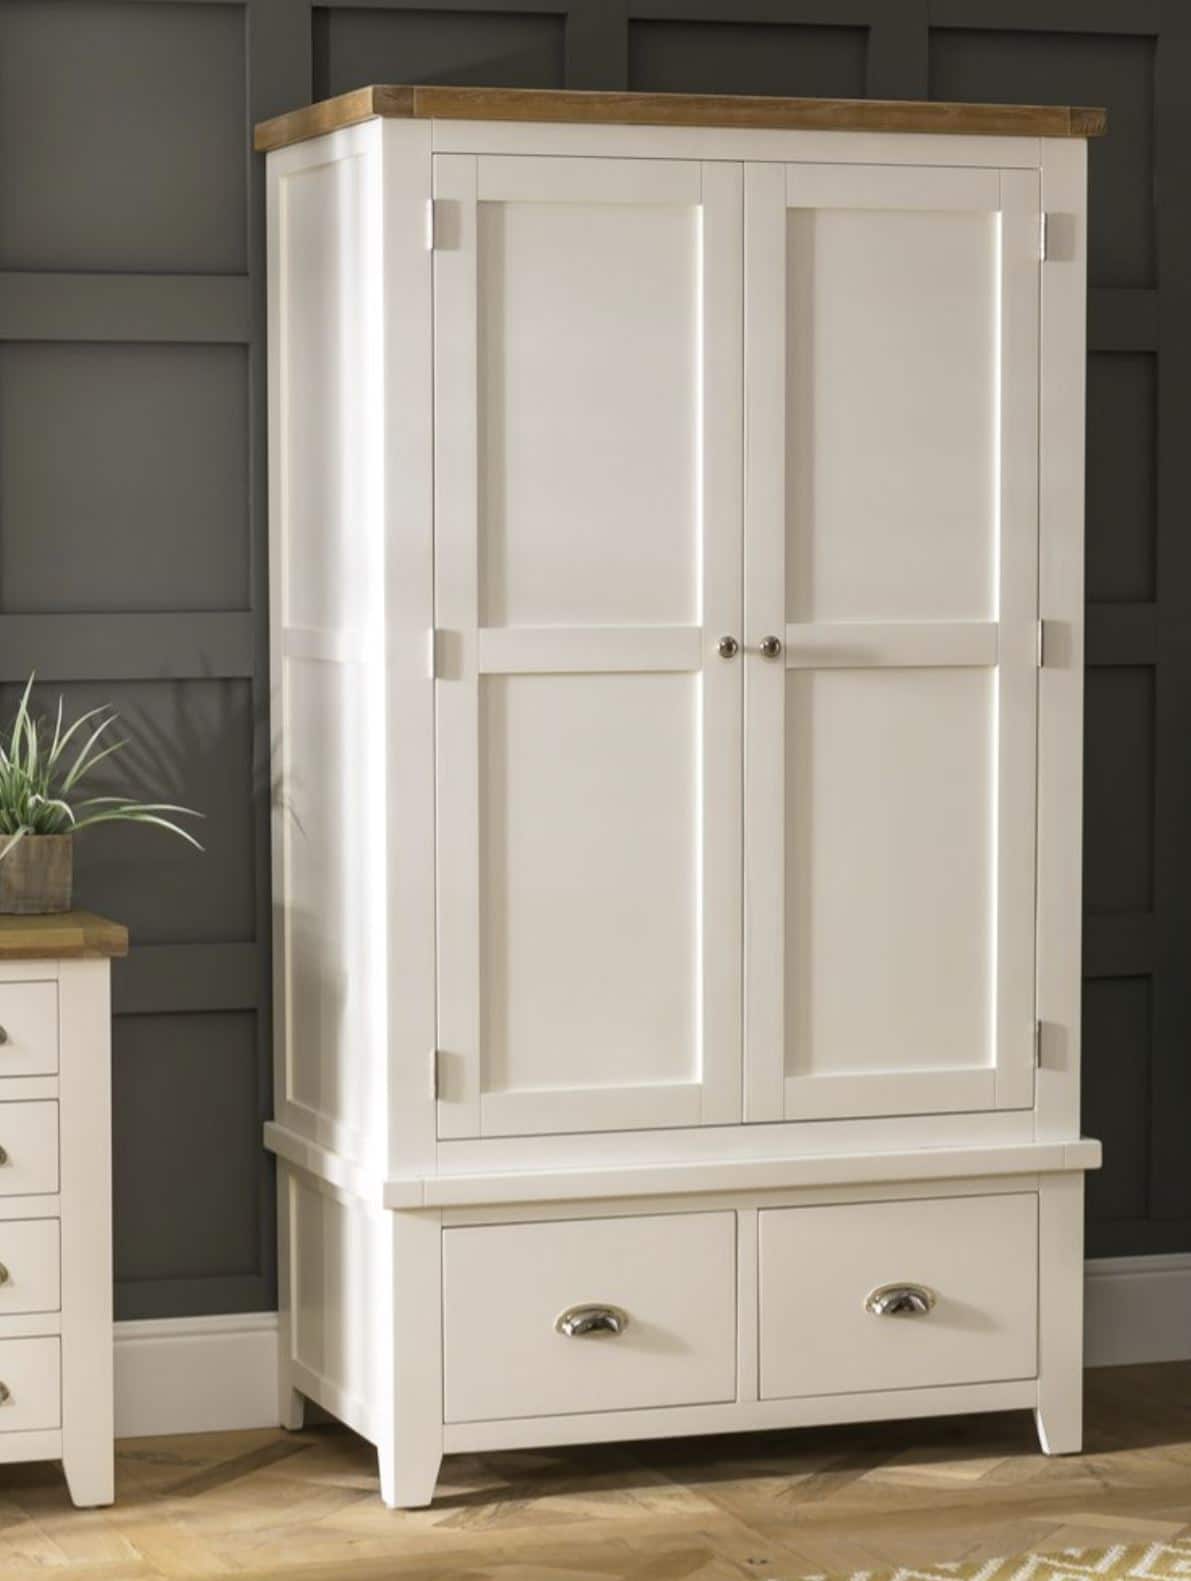 Classic Country Style for Your Bedroom: The Cheshire Cream Double Wardrobe